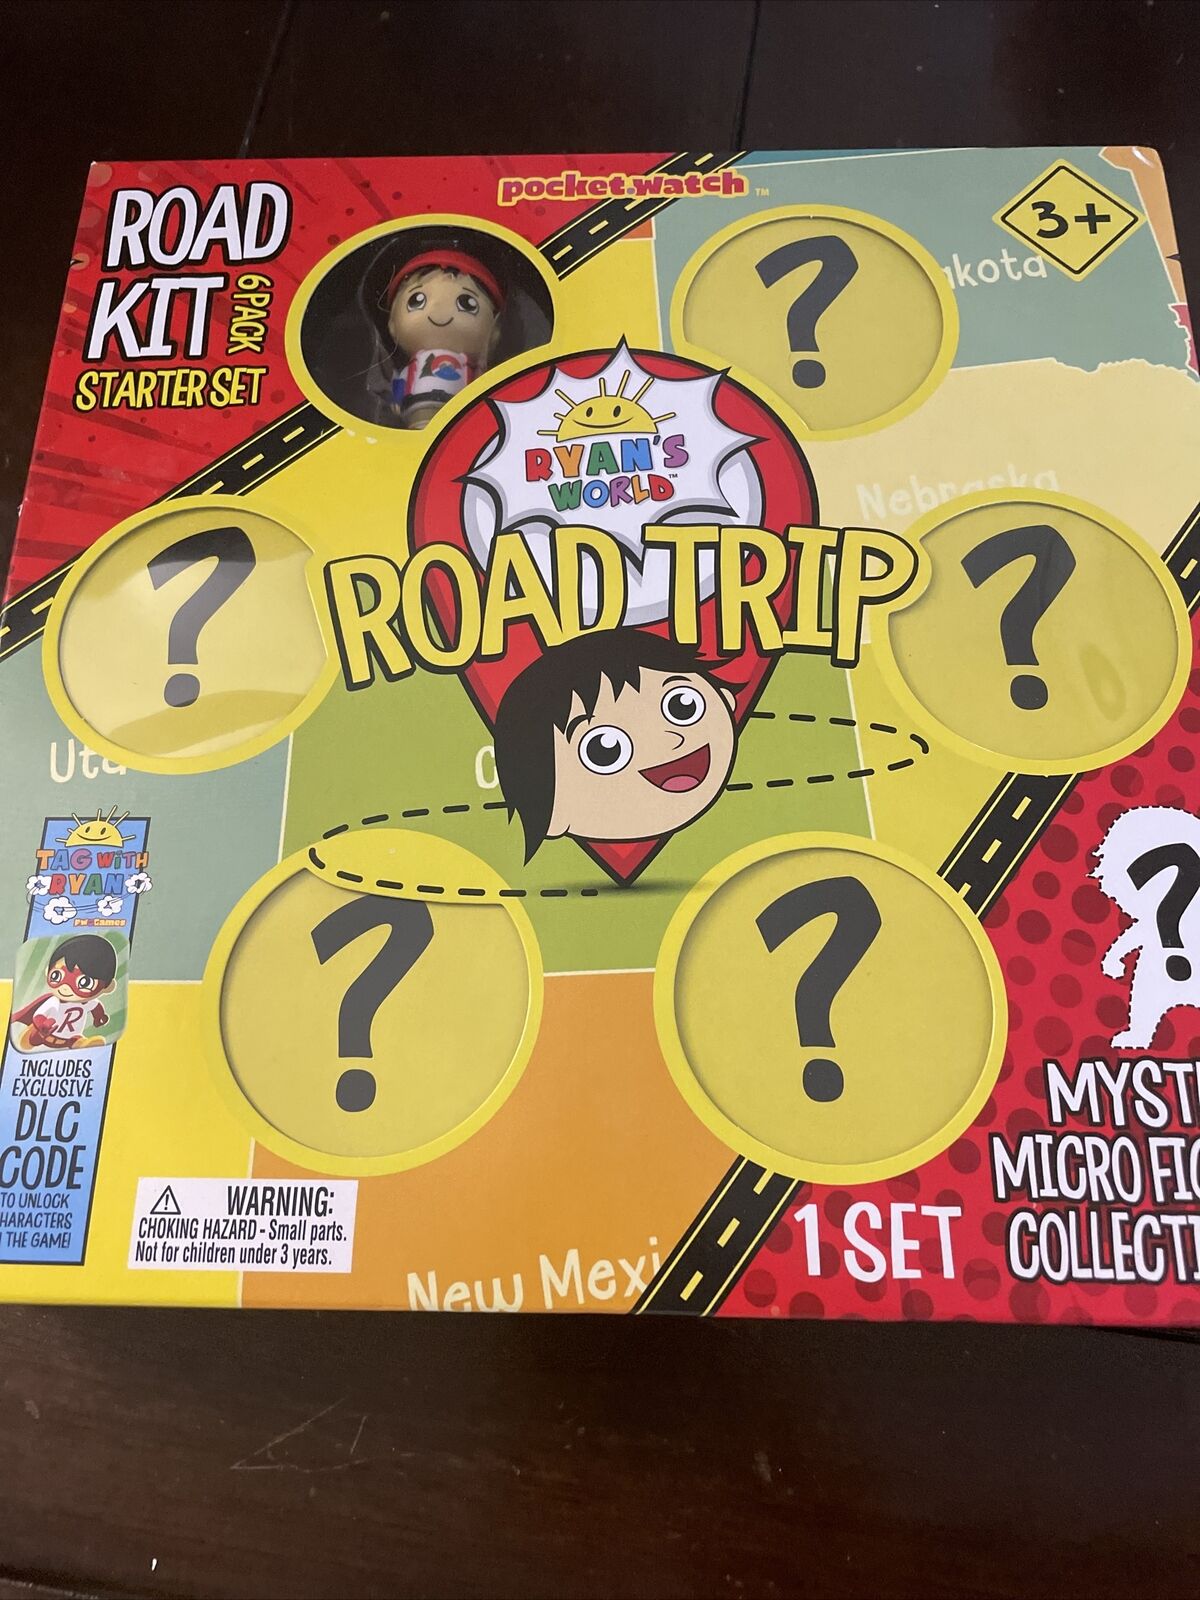 Ryan's World Usa Road Trip Road Kit Micro Boxed Set - 6 Pack Of Micro Figures